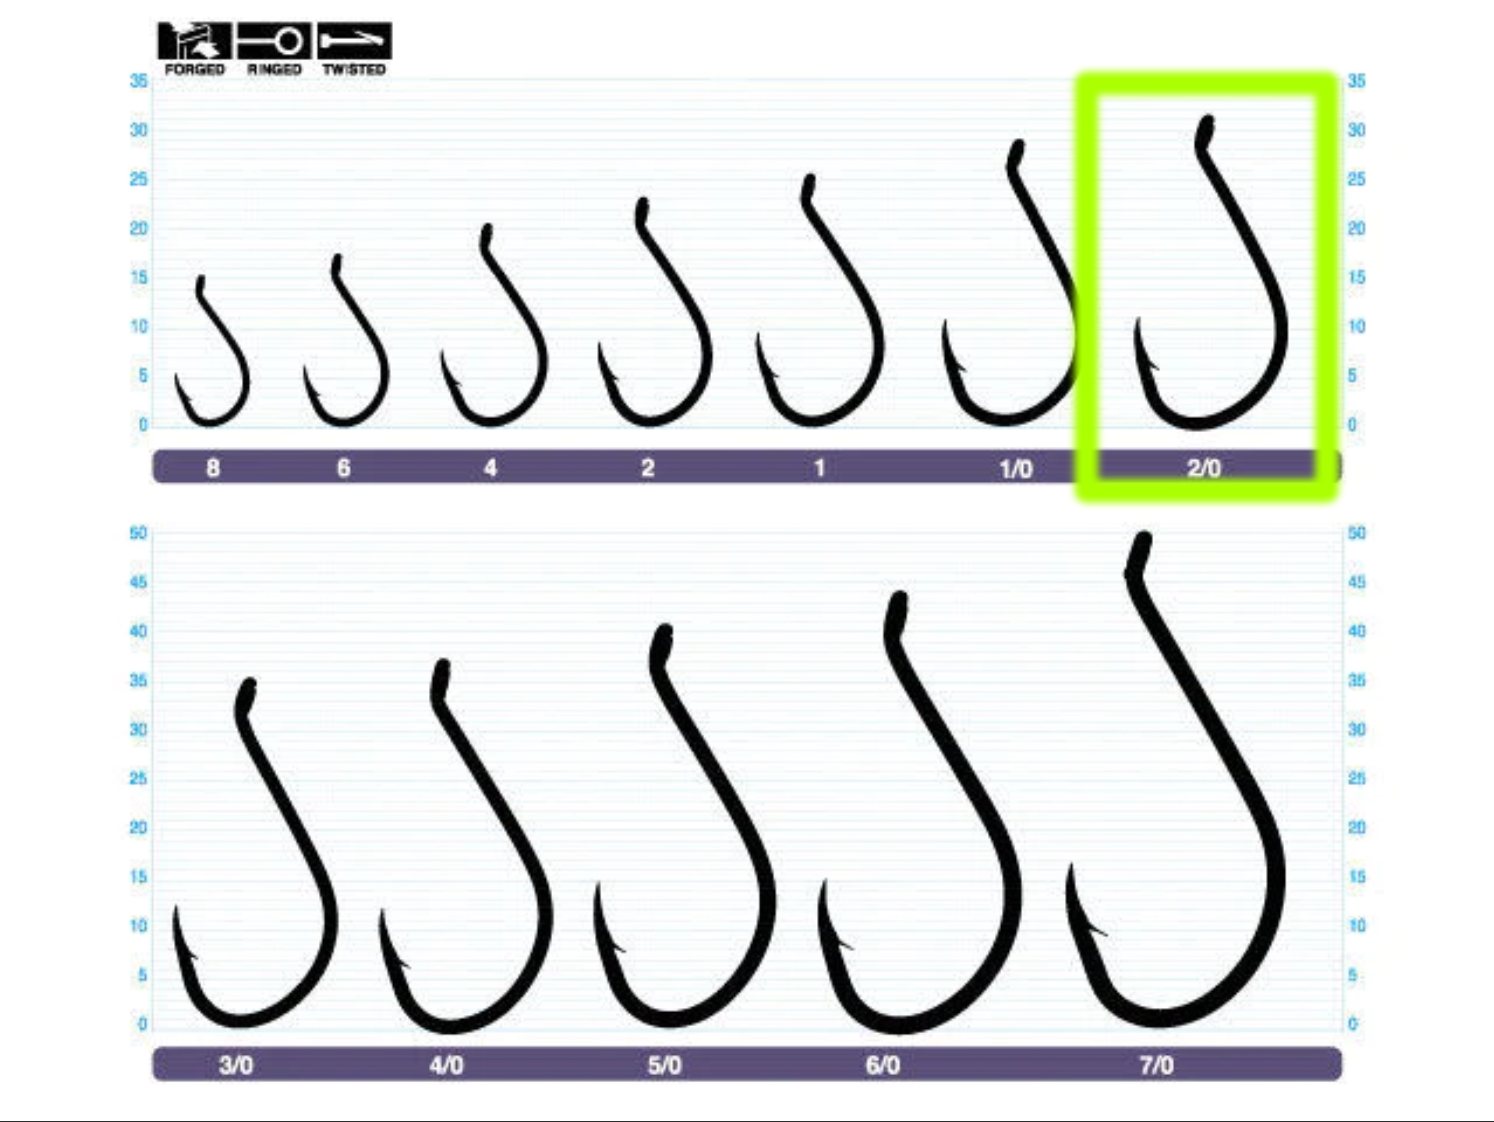 OWNER SSW CUTTING POINT PRO HOOKS 5311-151 CUT POINT OCTOPUS PRO